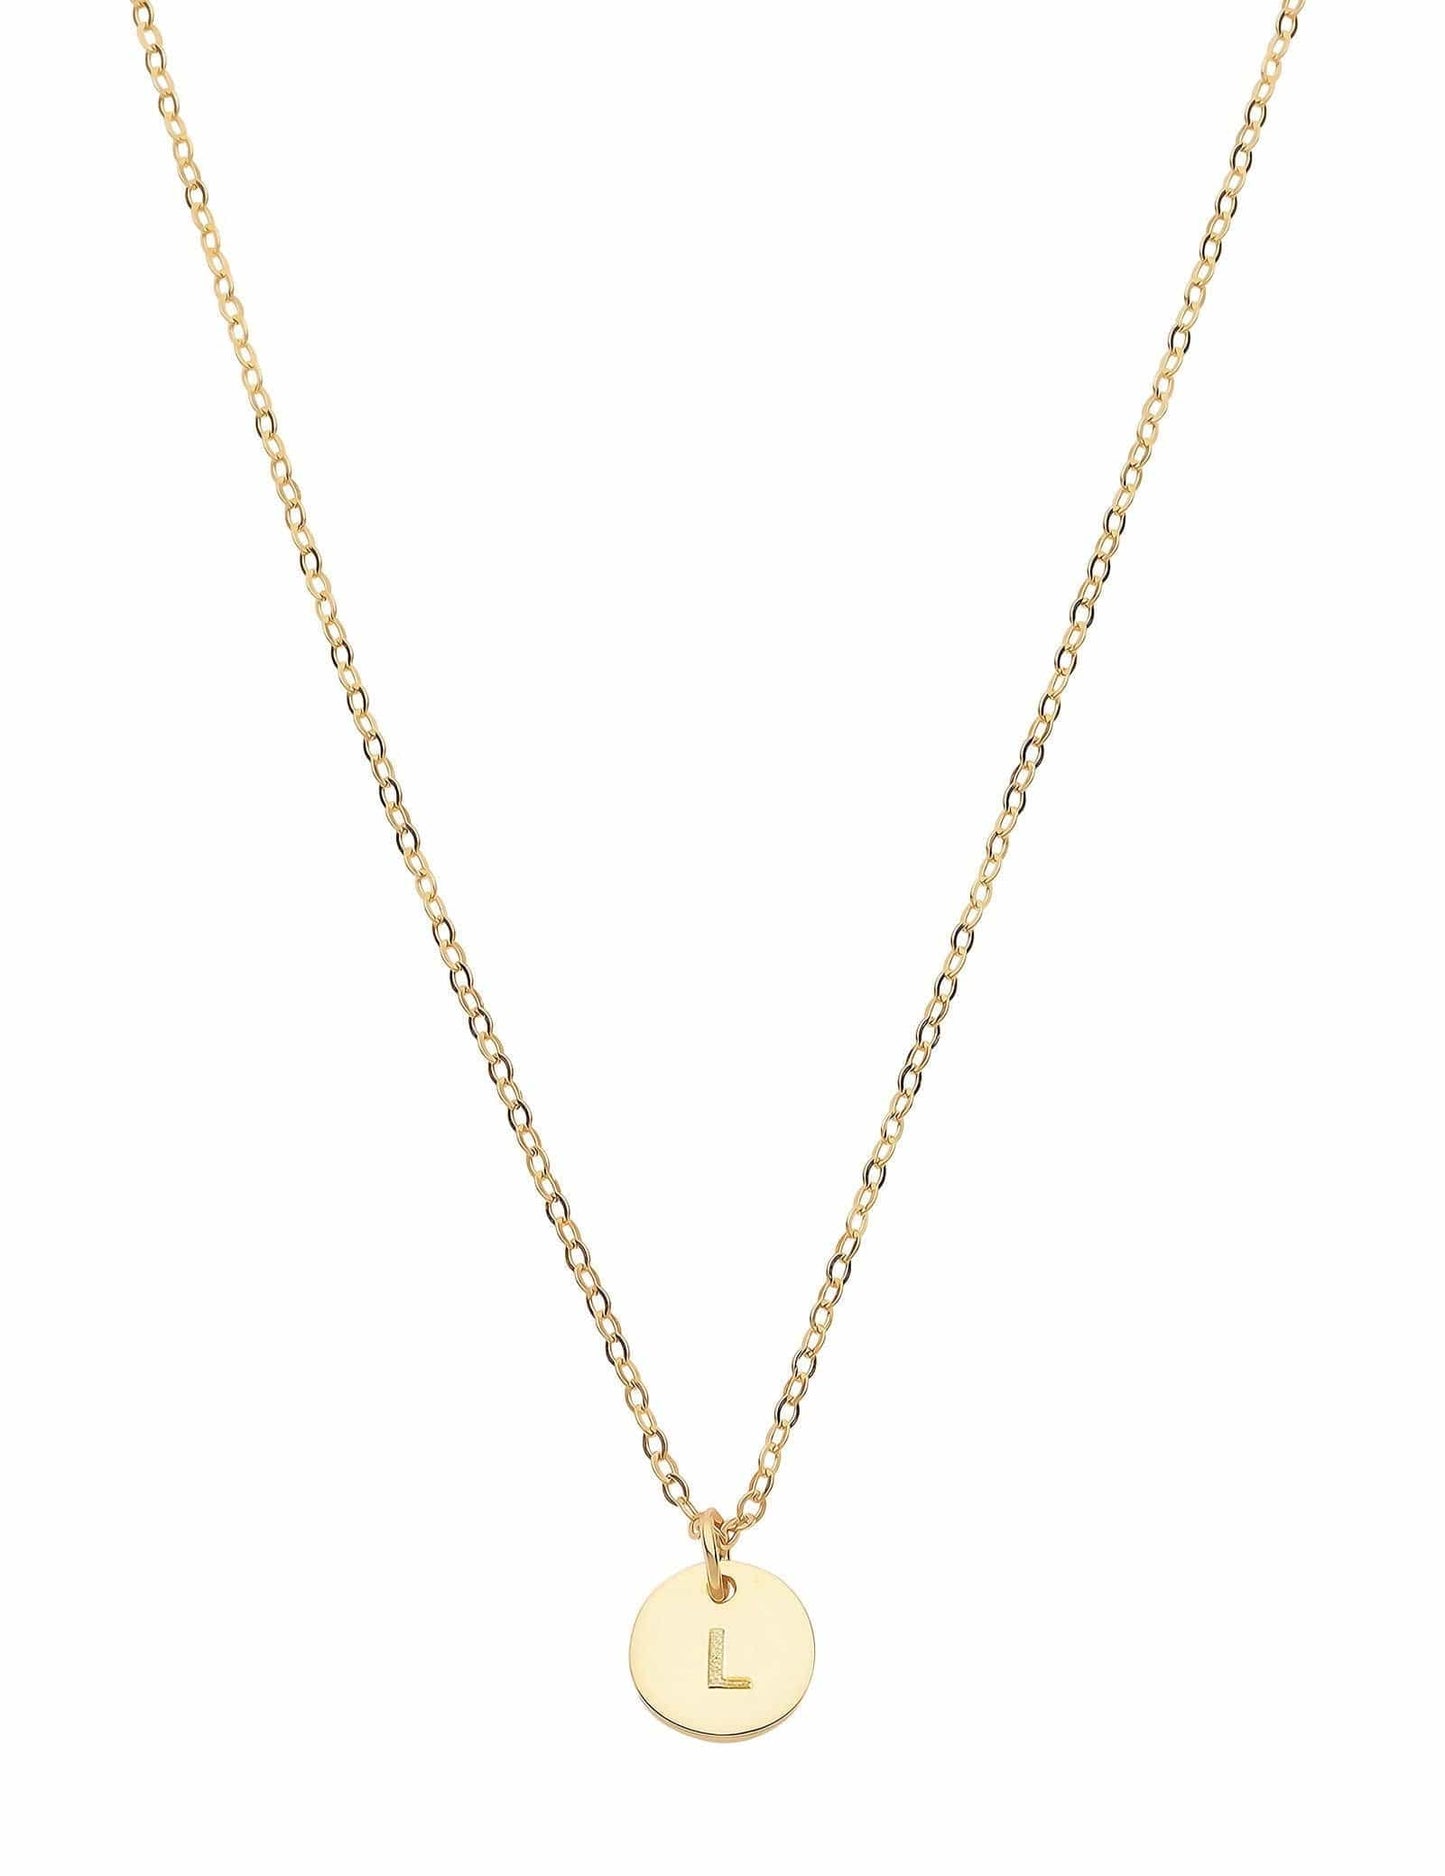 Dear Addison Yellow Gold Letter L Necklace